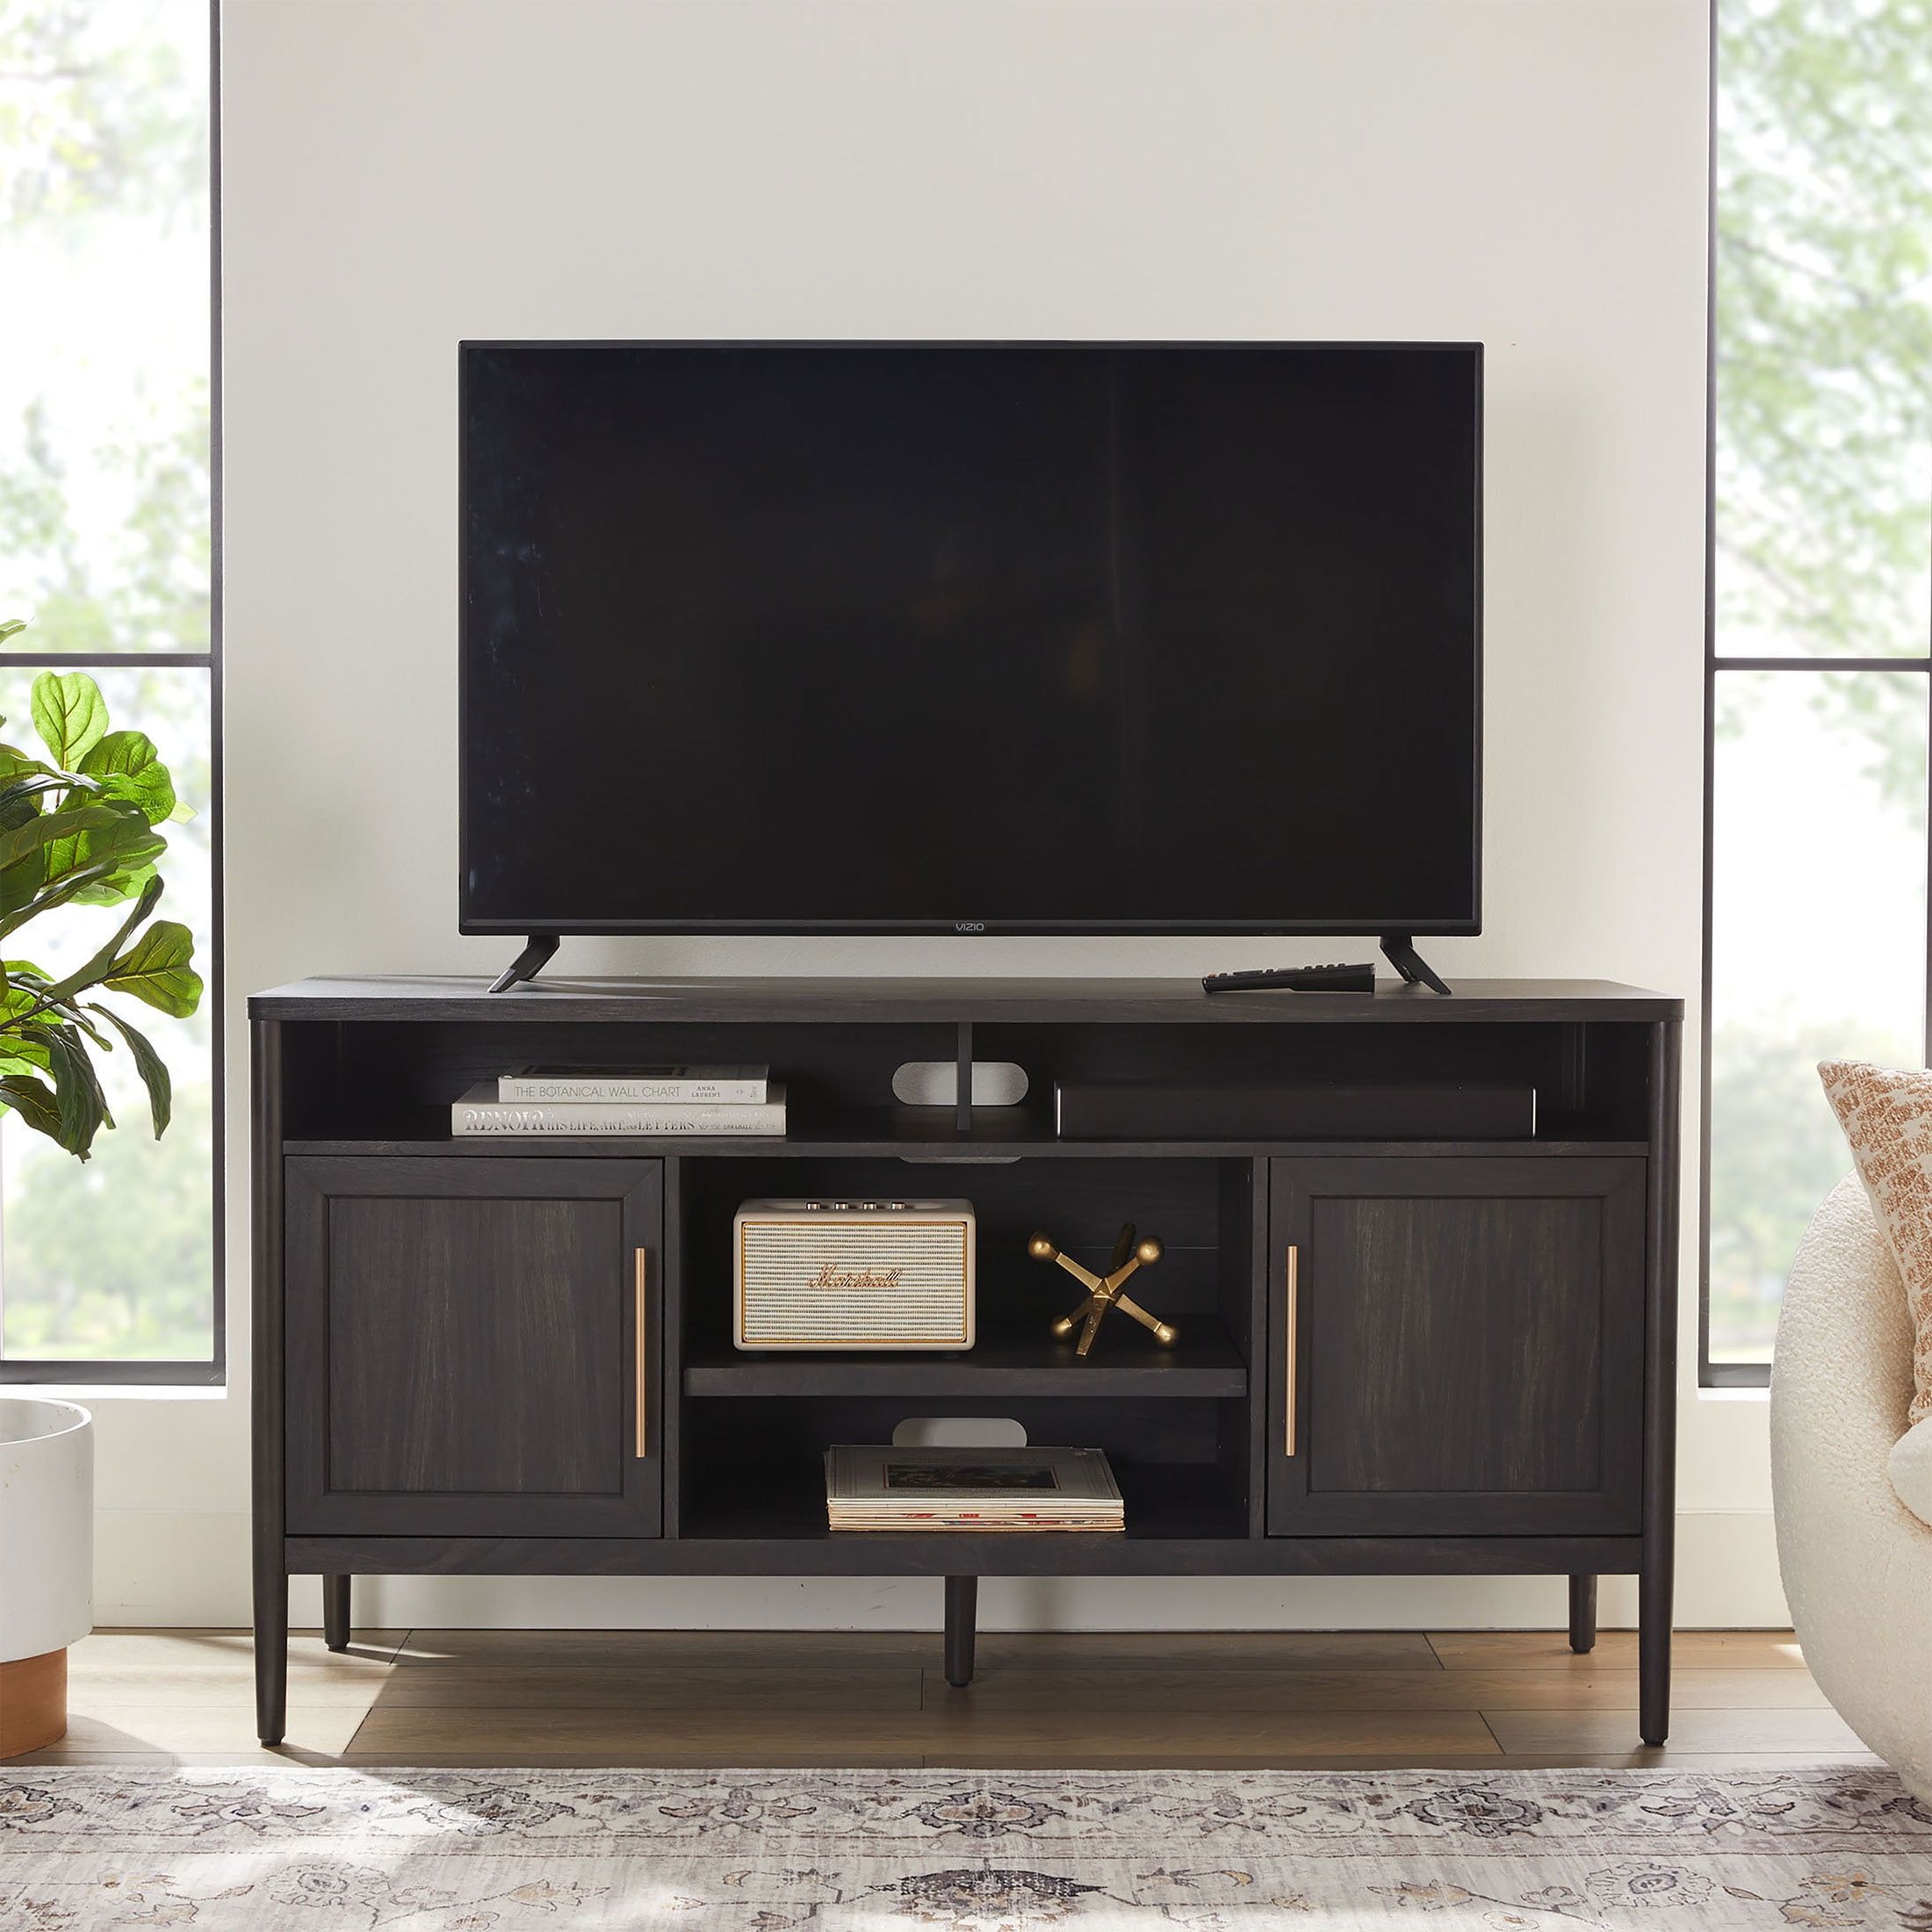 Better Homes & Gardens Oaklee Tv Stand For Tvs Up To 70”, Charcoal Pertaining To Oaklee Tv Stands (View 5 of 20)